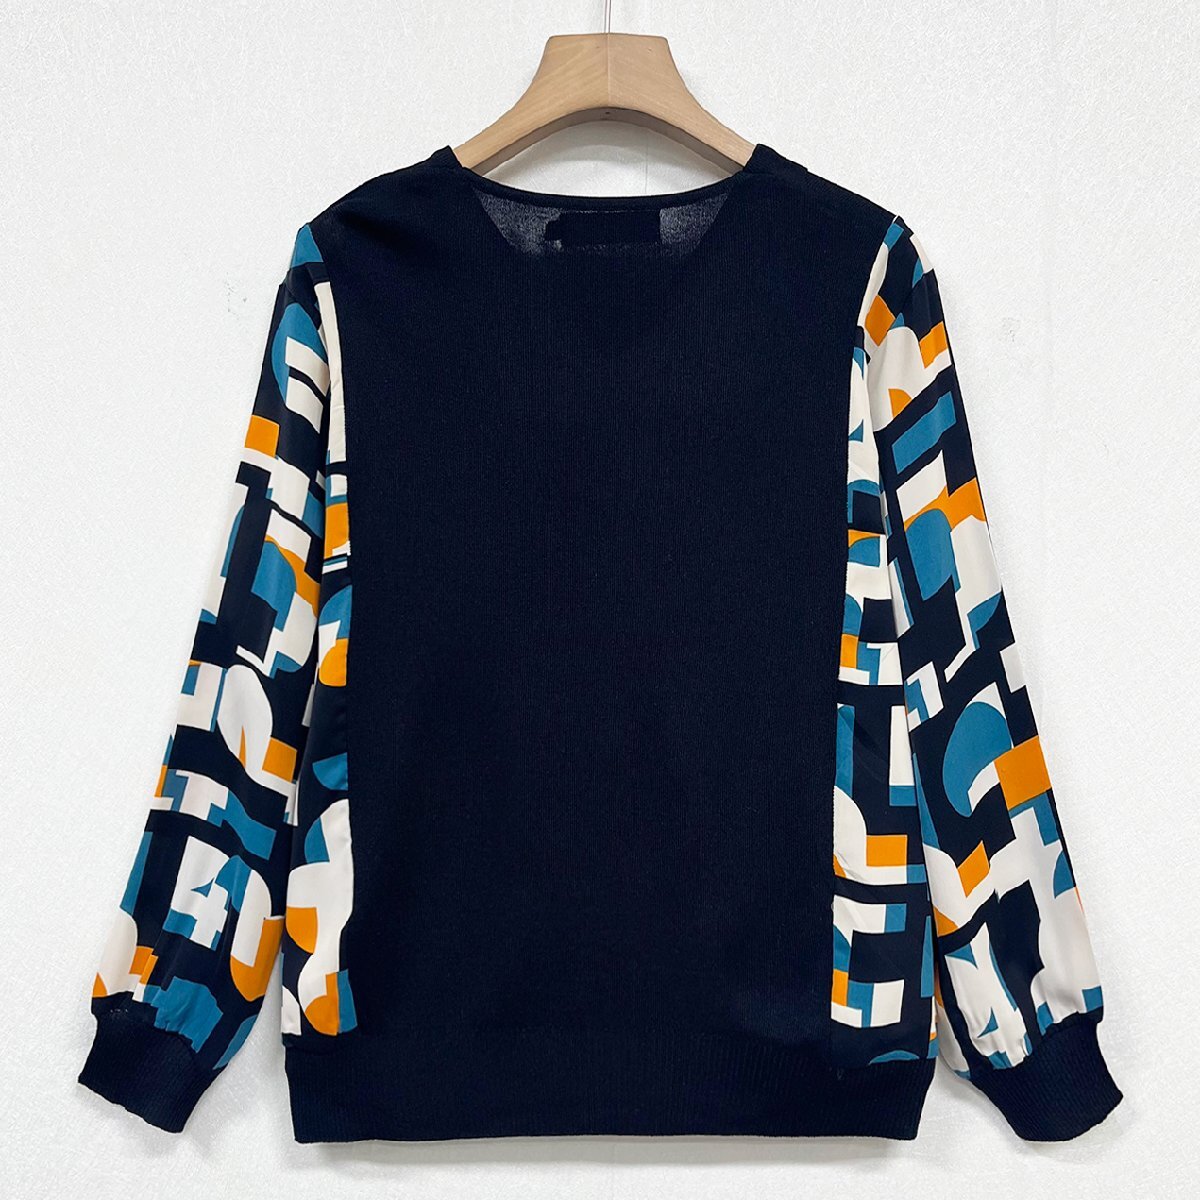  new work Europe made * regular price 4 ten thousand * BVLGARY a departure *RISELIN sweatshirt ventilation thin knitted unusual material switch . what . pattern commuting tops lady's spring summer L